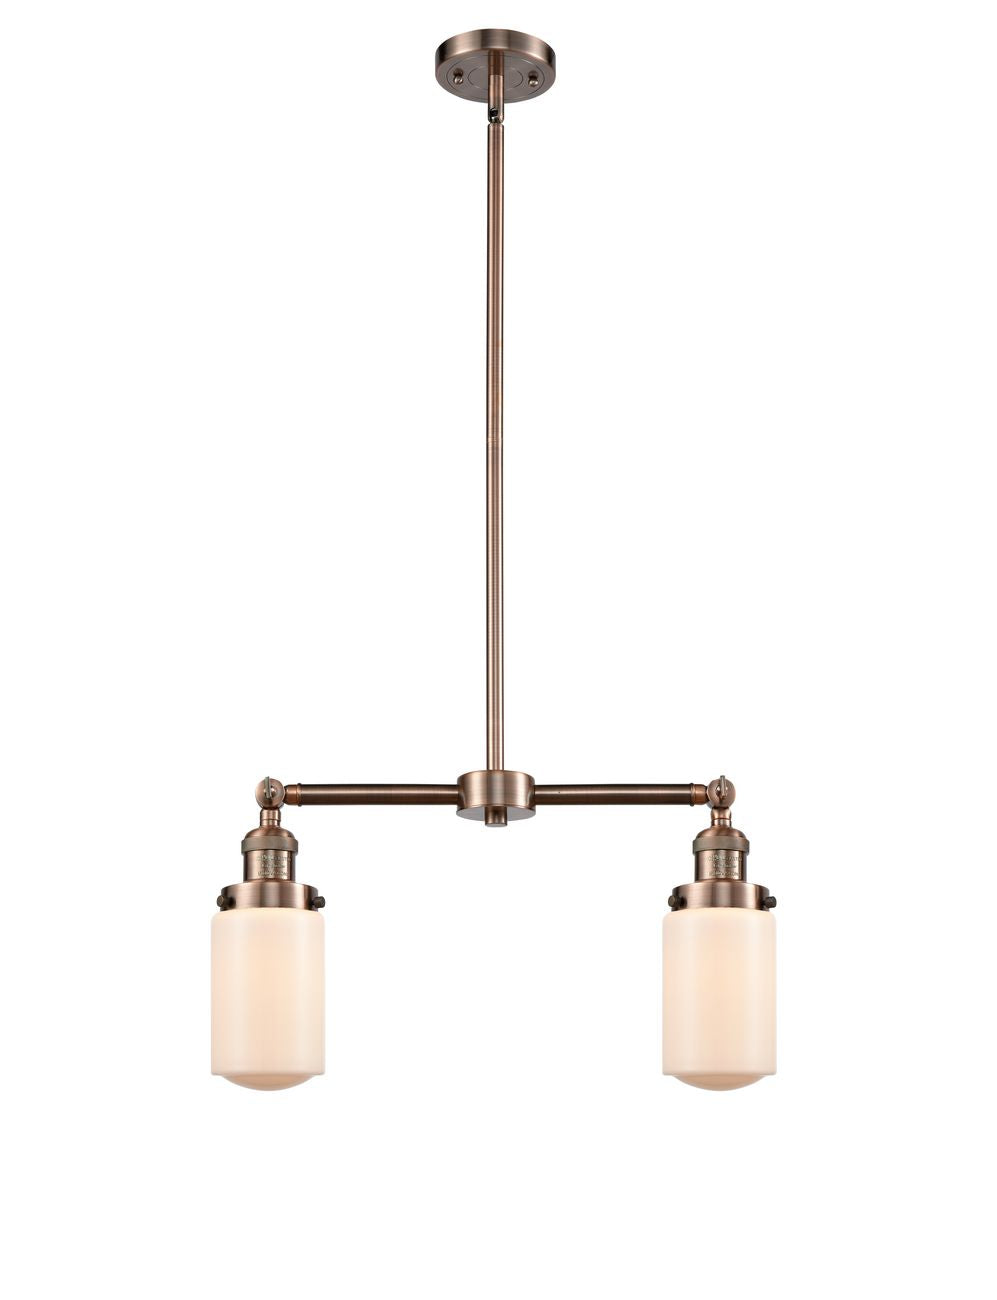 209-AC-G311 2-Light 21" Antique Copper Island Light - Matte White Cased Dover Glass - LED Bulb - Dimmensions: 21 x 4.5 x 10.75<br>Minimum Height : 21.625<br>Maximum Height : 44.625 - Sloped Ceiling Compatible: Yes